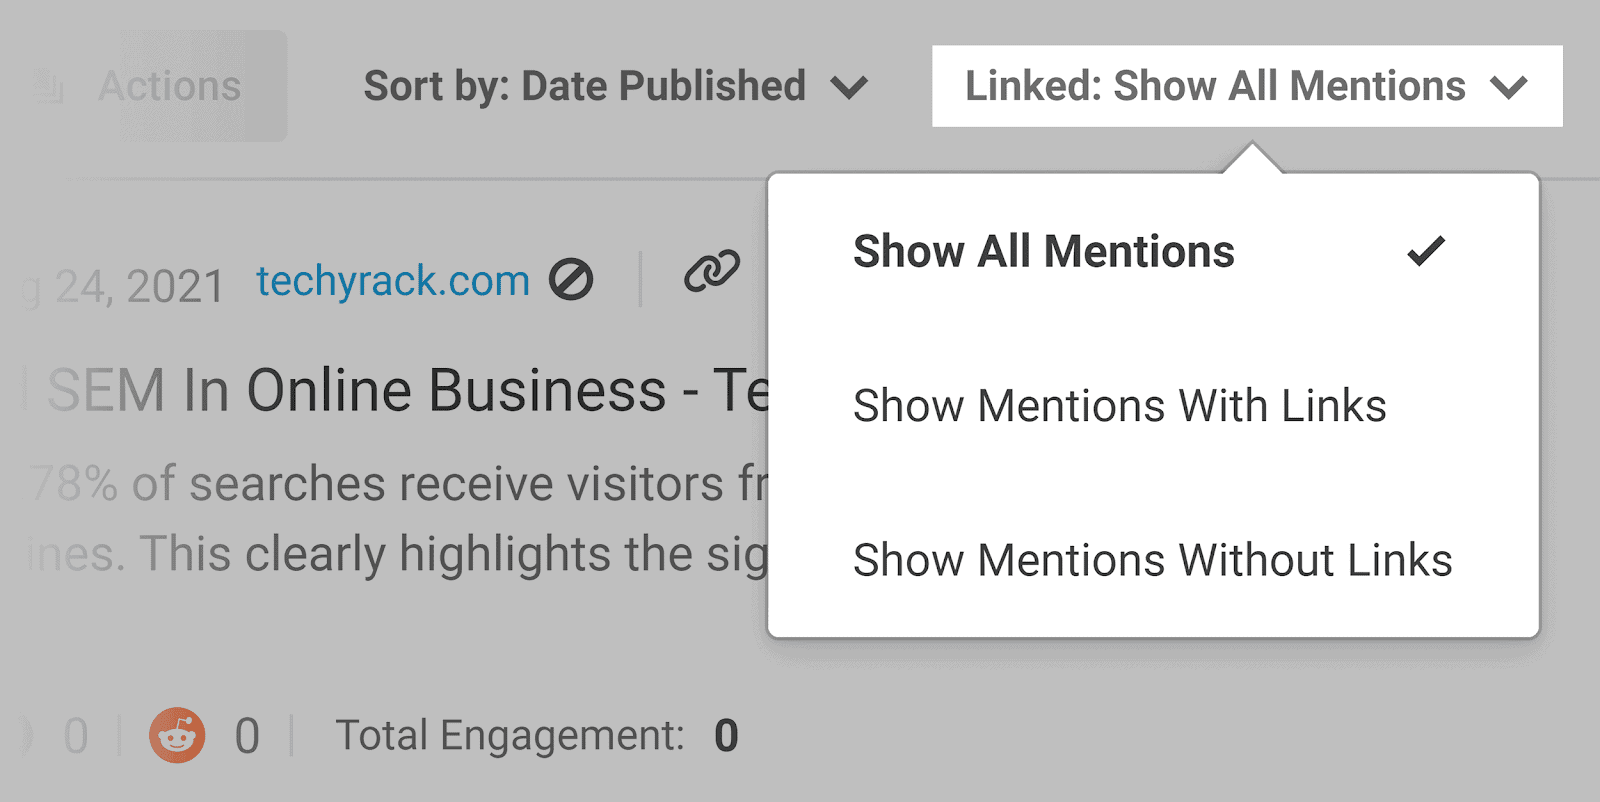 Mentions without links